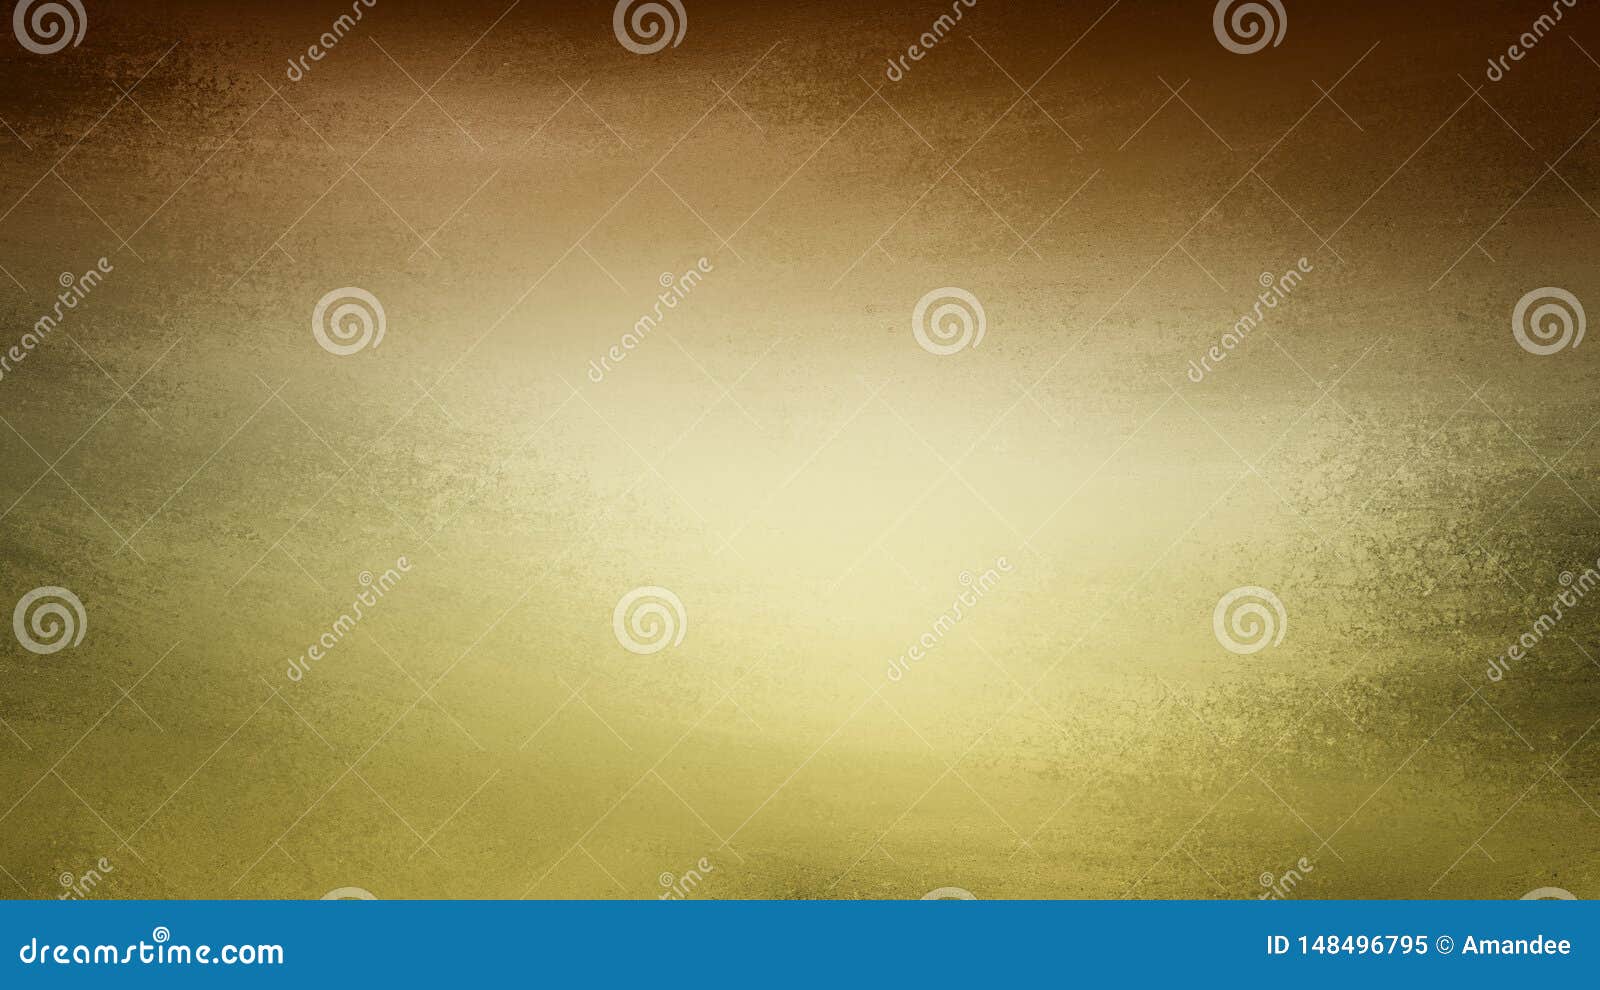 brown and yellow background with faint sponged black grunge texture border in an old vintage 